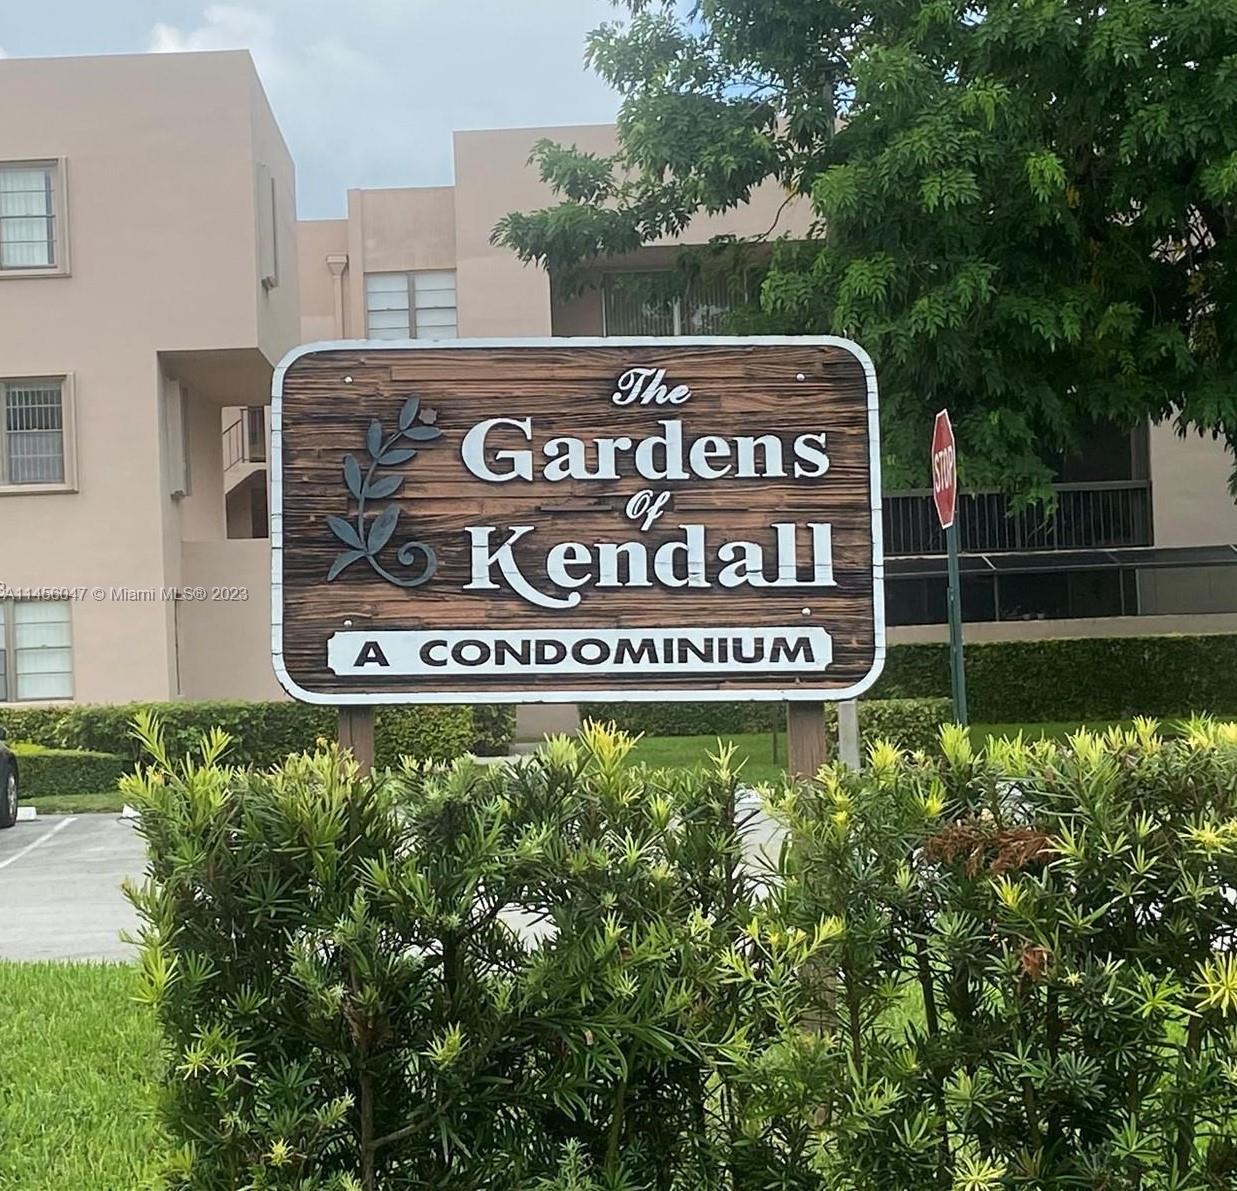 Completely renovated 3rd floor unit in  Kendall.  Top location across from Miami-Dade College.  Close to all expressways.  Enjoy all "Gardens" amenities including swimming pool, tennis courts, security patrol & more.  Landlord requires 1st month rent, 2 months security & good credit.